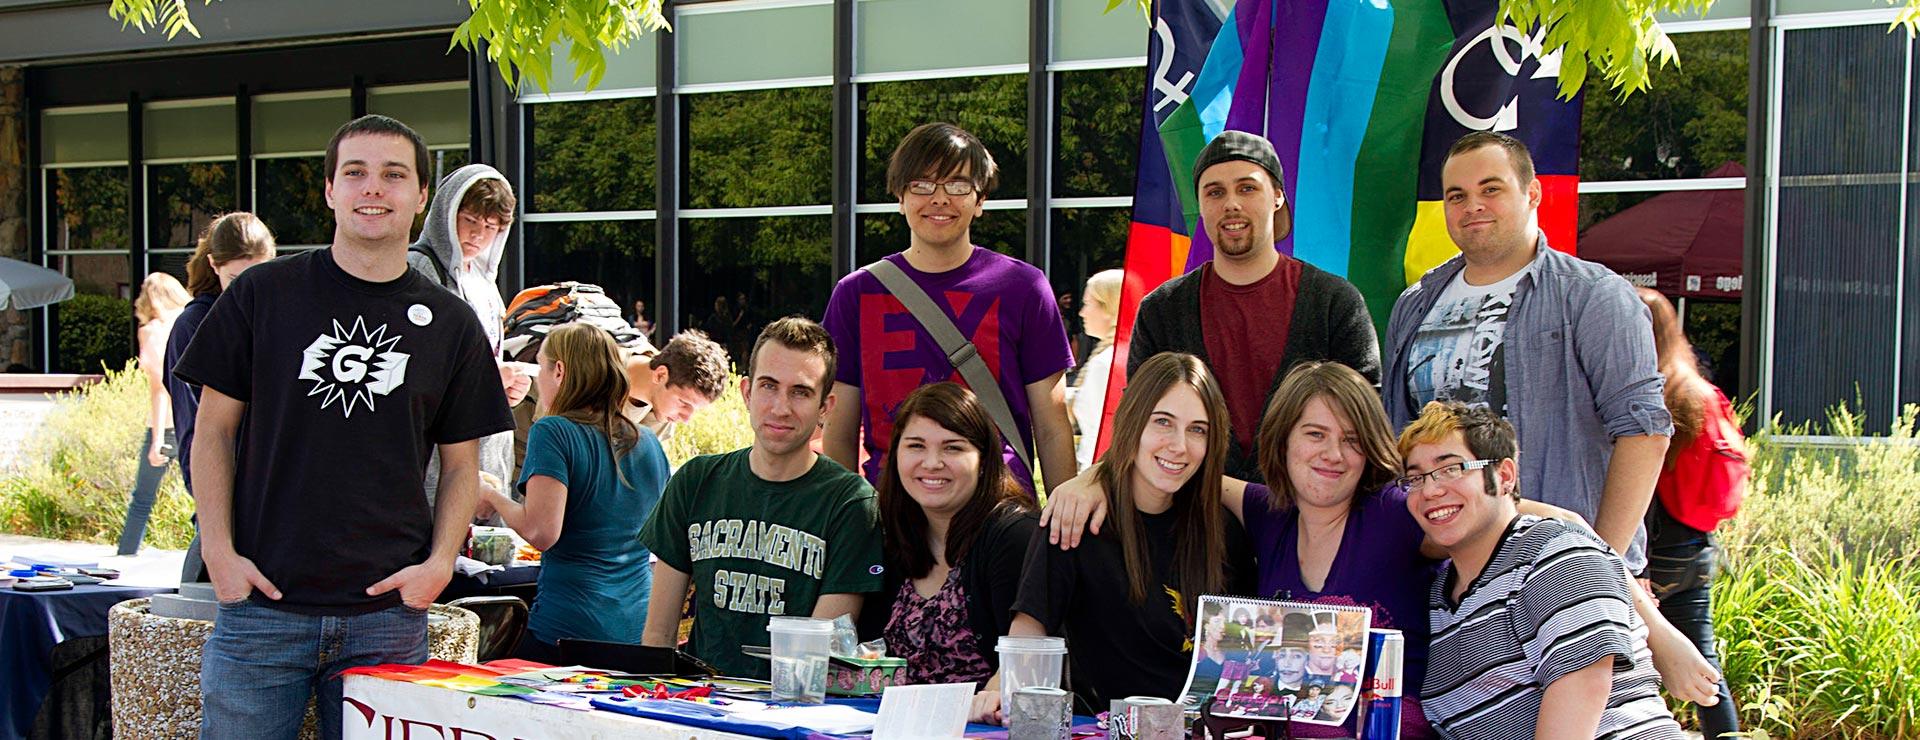 Students representing Pride and Rainbow Alliance student club